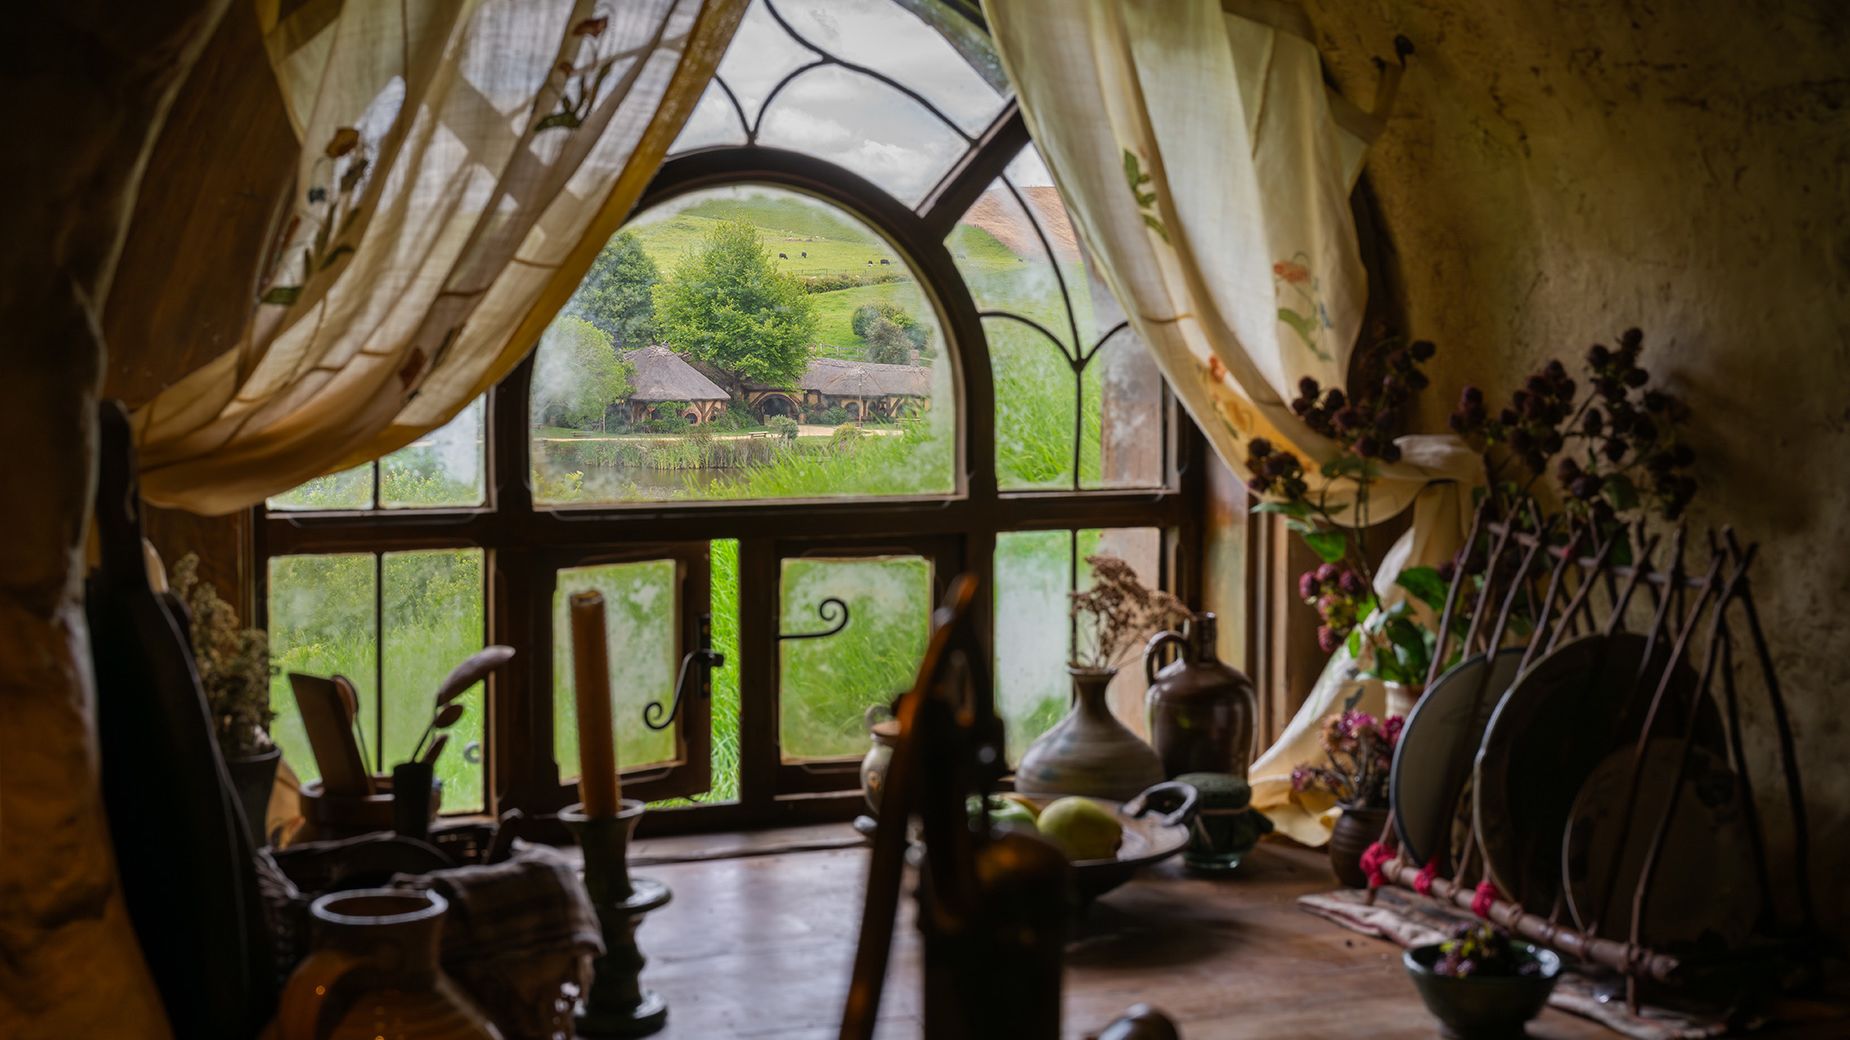 Two fully decorated Hobbit Holes at New Zealand attraction Hobbiton have opened to the public for the first time.